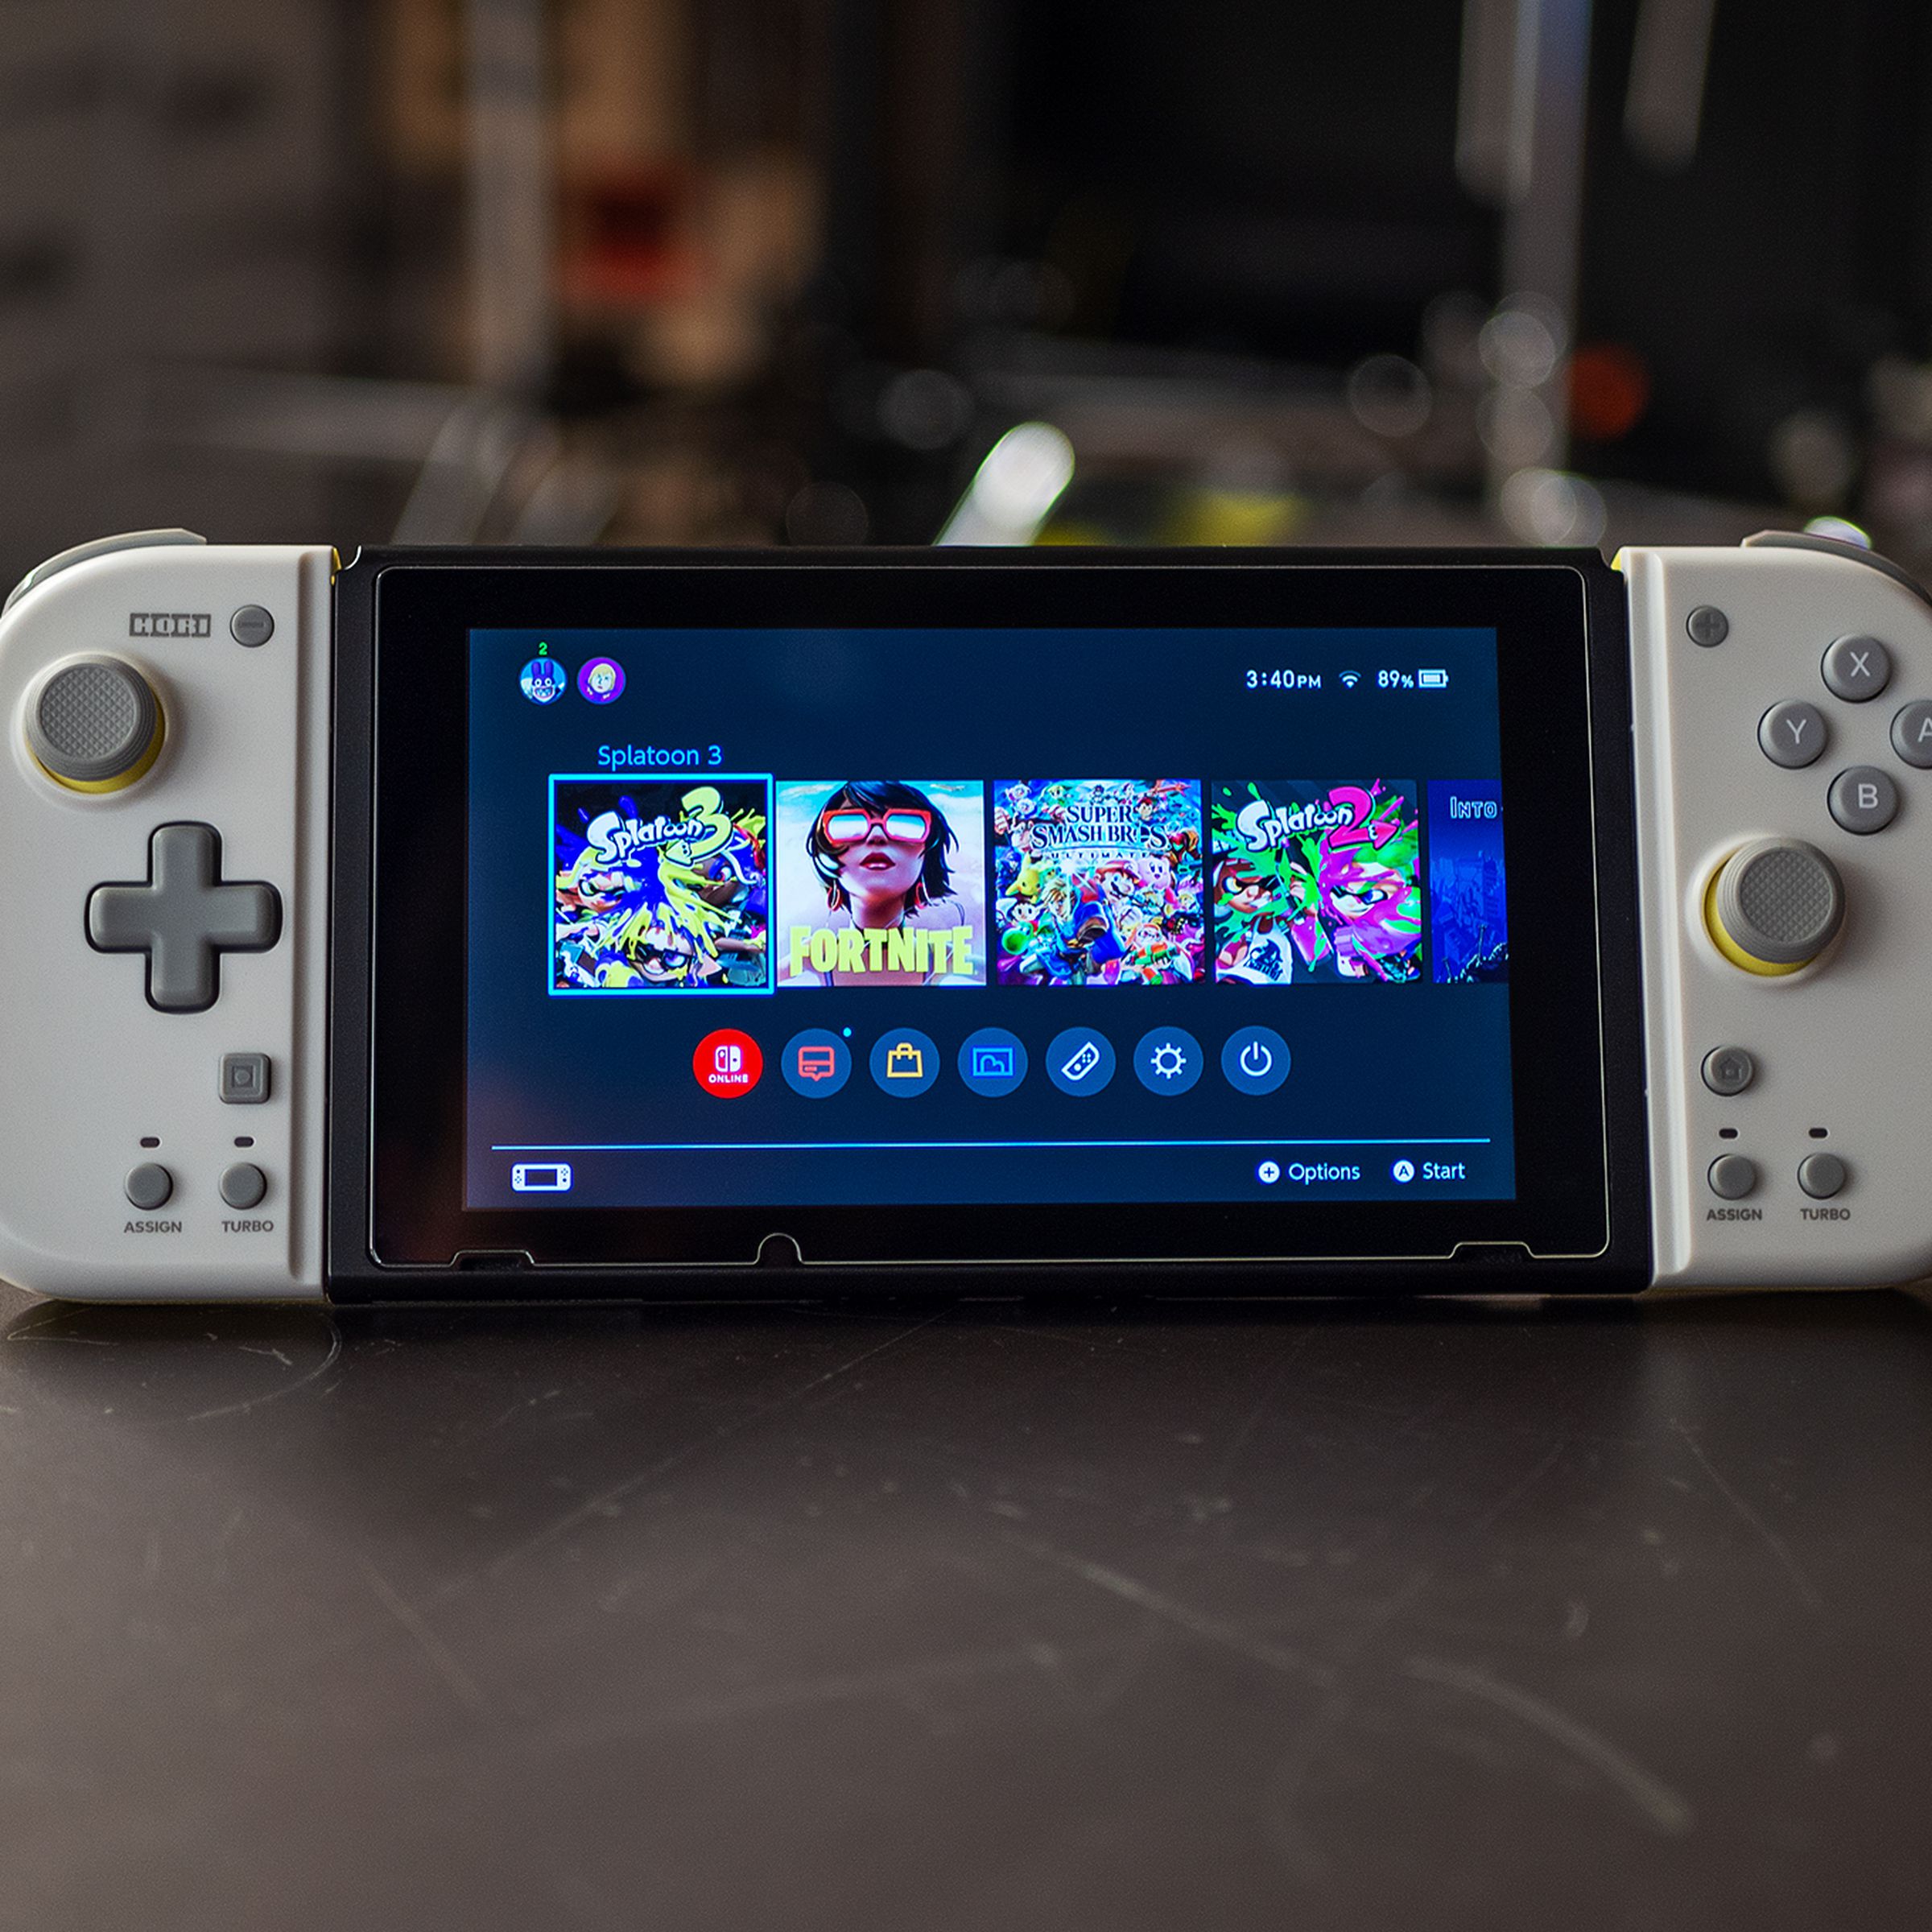 Nintendo Switch console shown with Hori’s Split Pad Compact controllers plugged in.